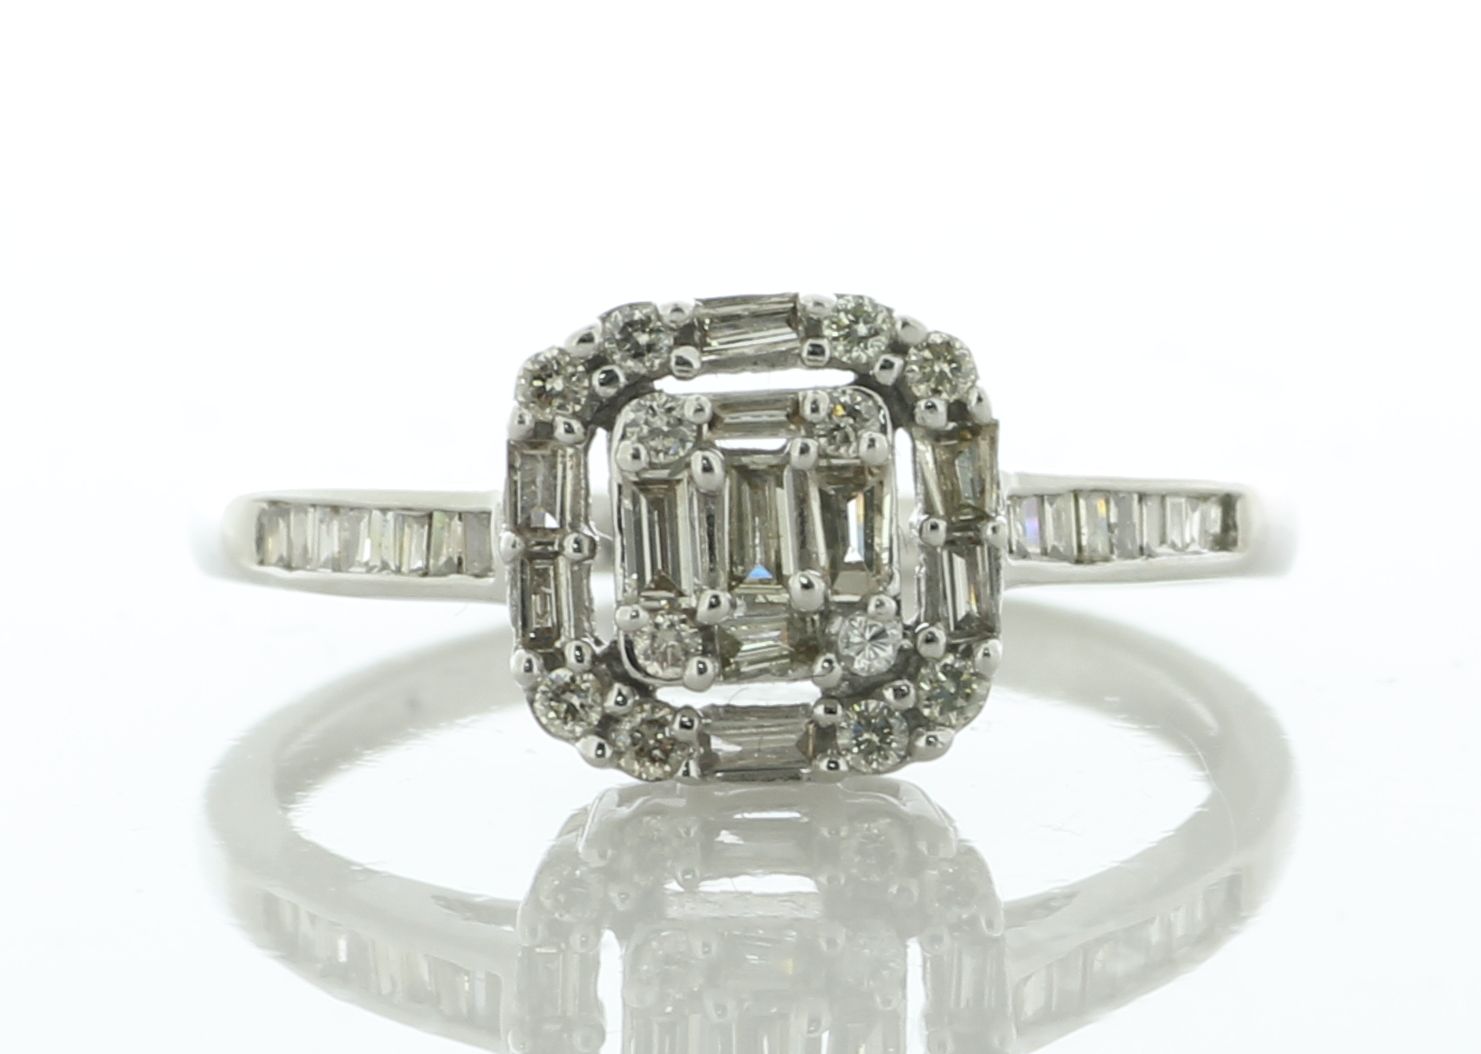 18ct White Gold Emerald Cluster Diamond Ring 0.30 Carats - Valued By IDI £2,850.00 - Five baguette